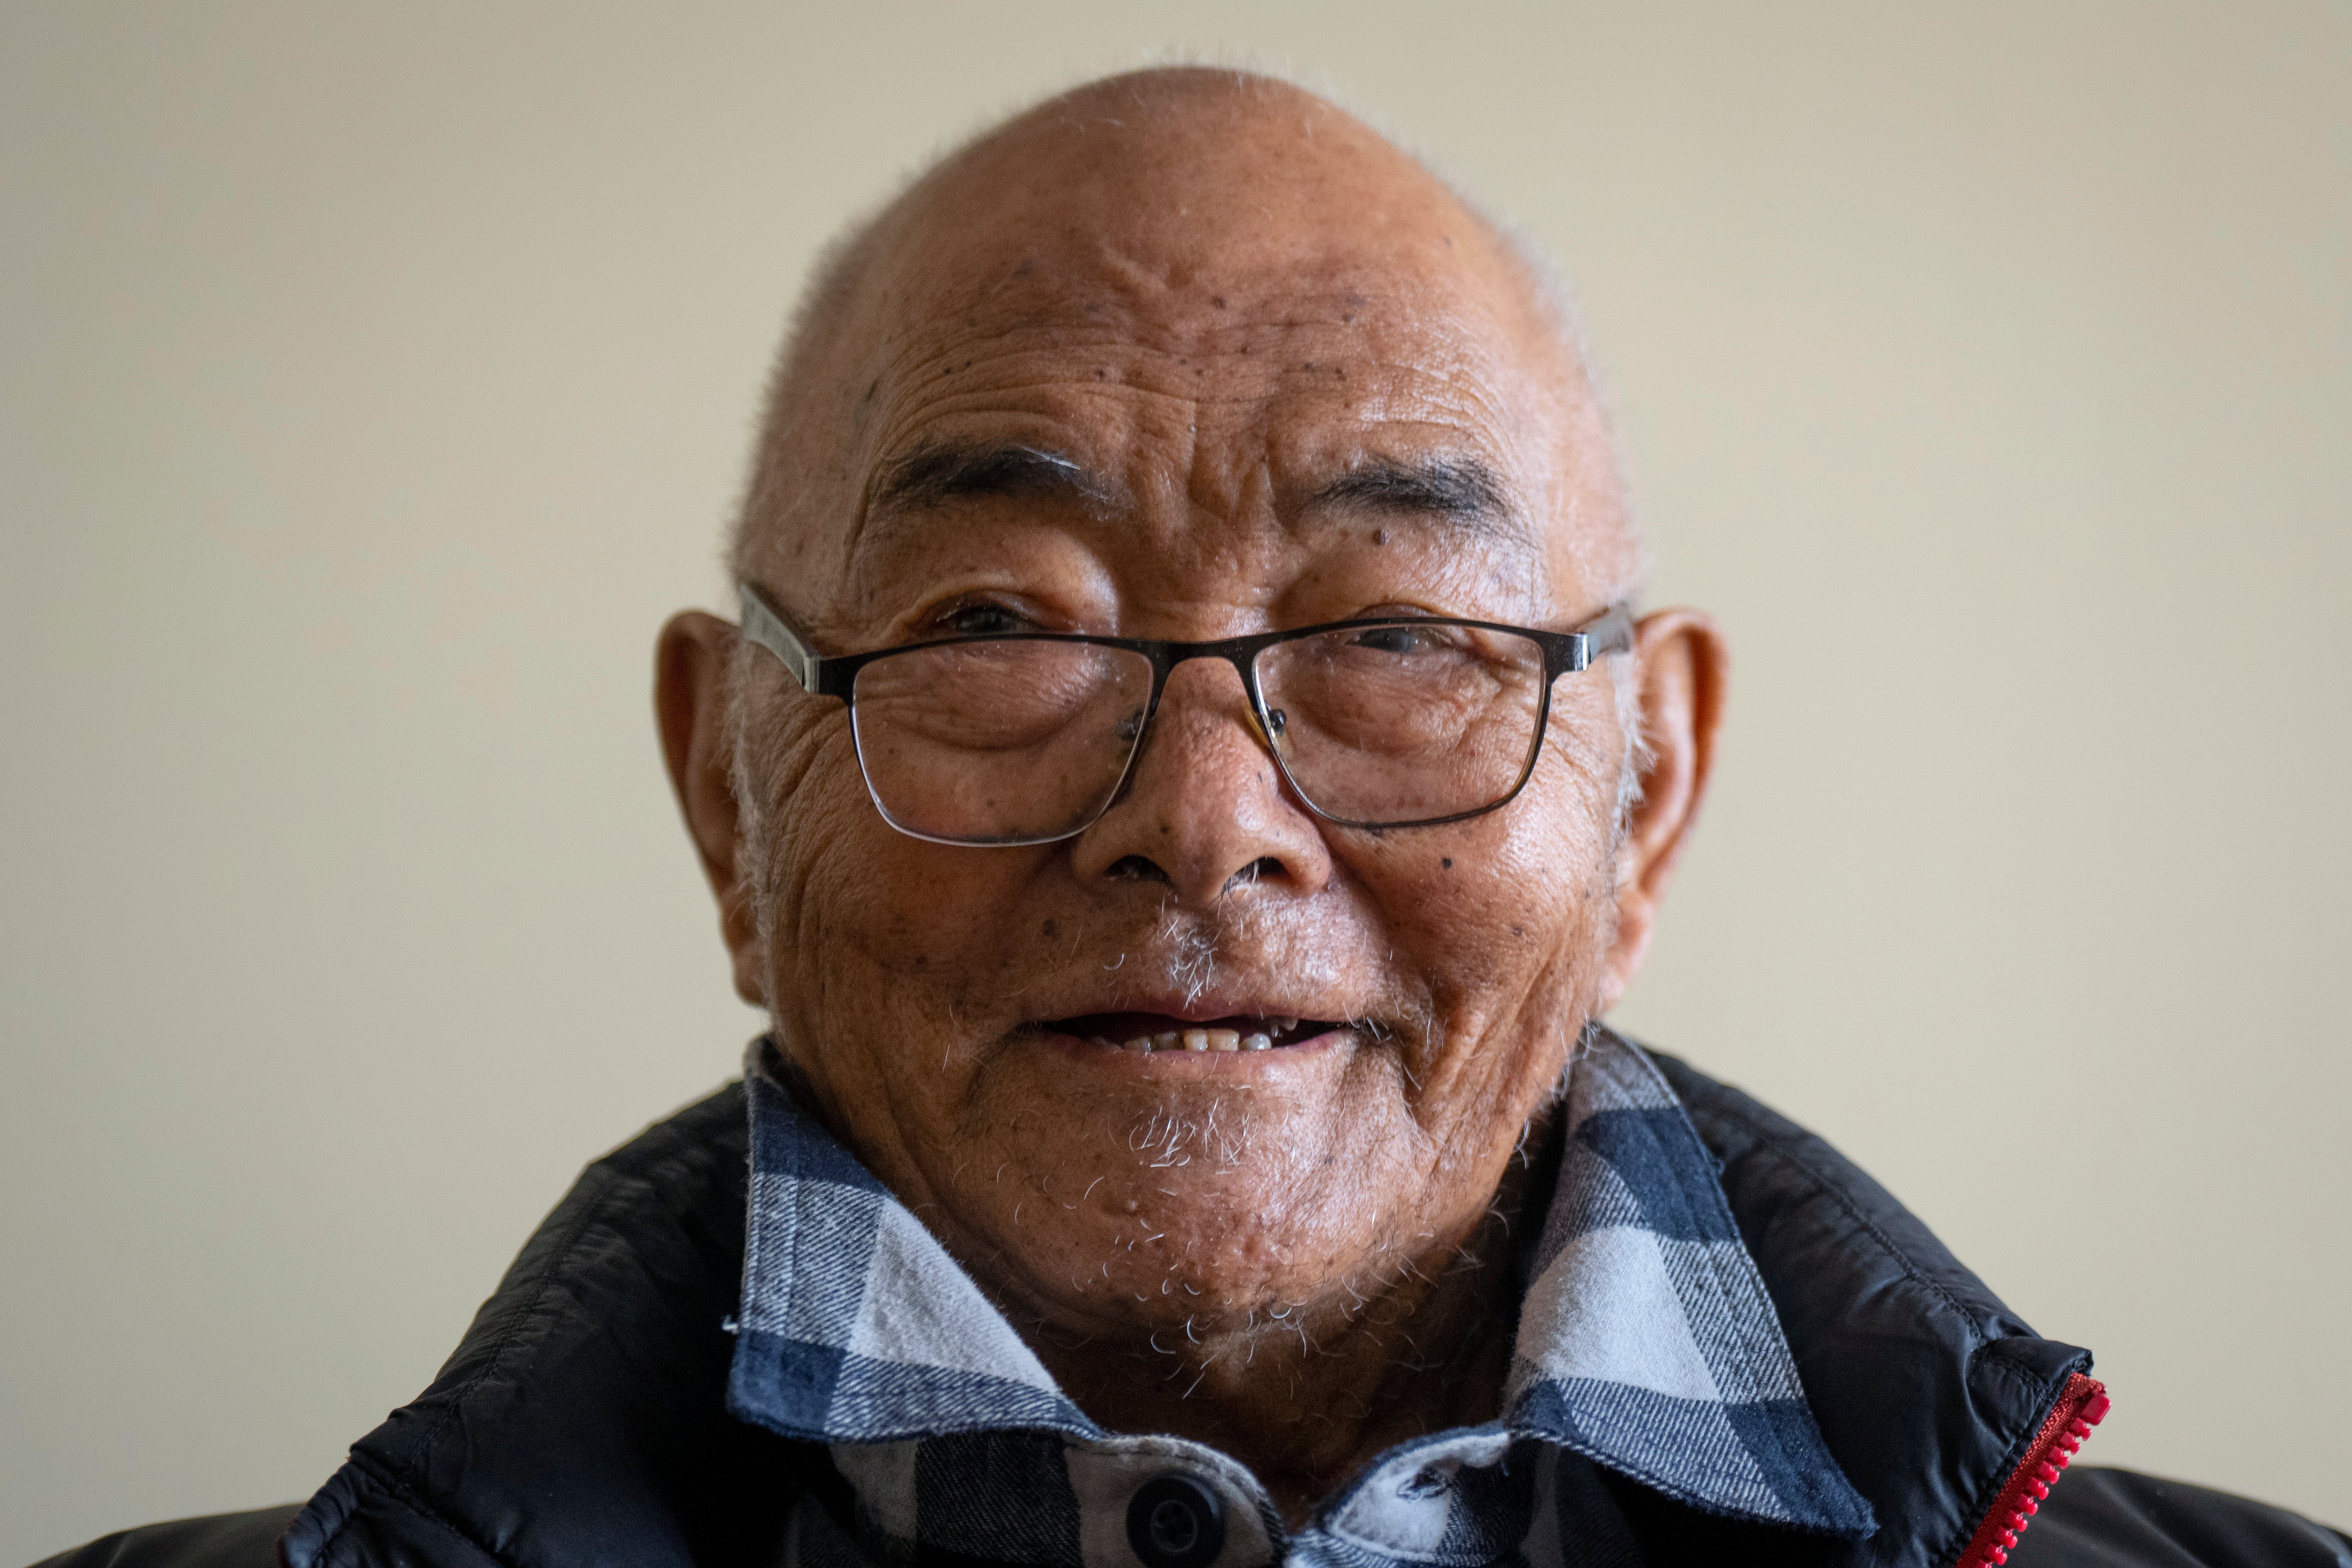 Kanchha Sherpa, 91, was among the 35 members in the team that put New Zealander Edmund Hillary and his Sherpa guide Tenzing Norgay atop Mount Everest